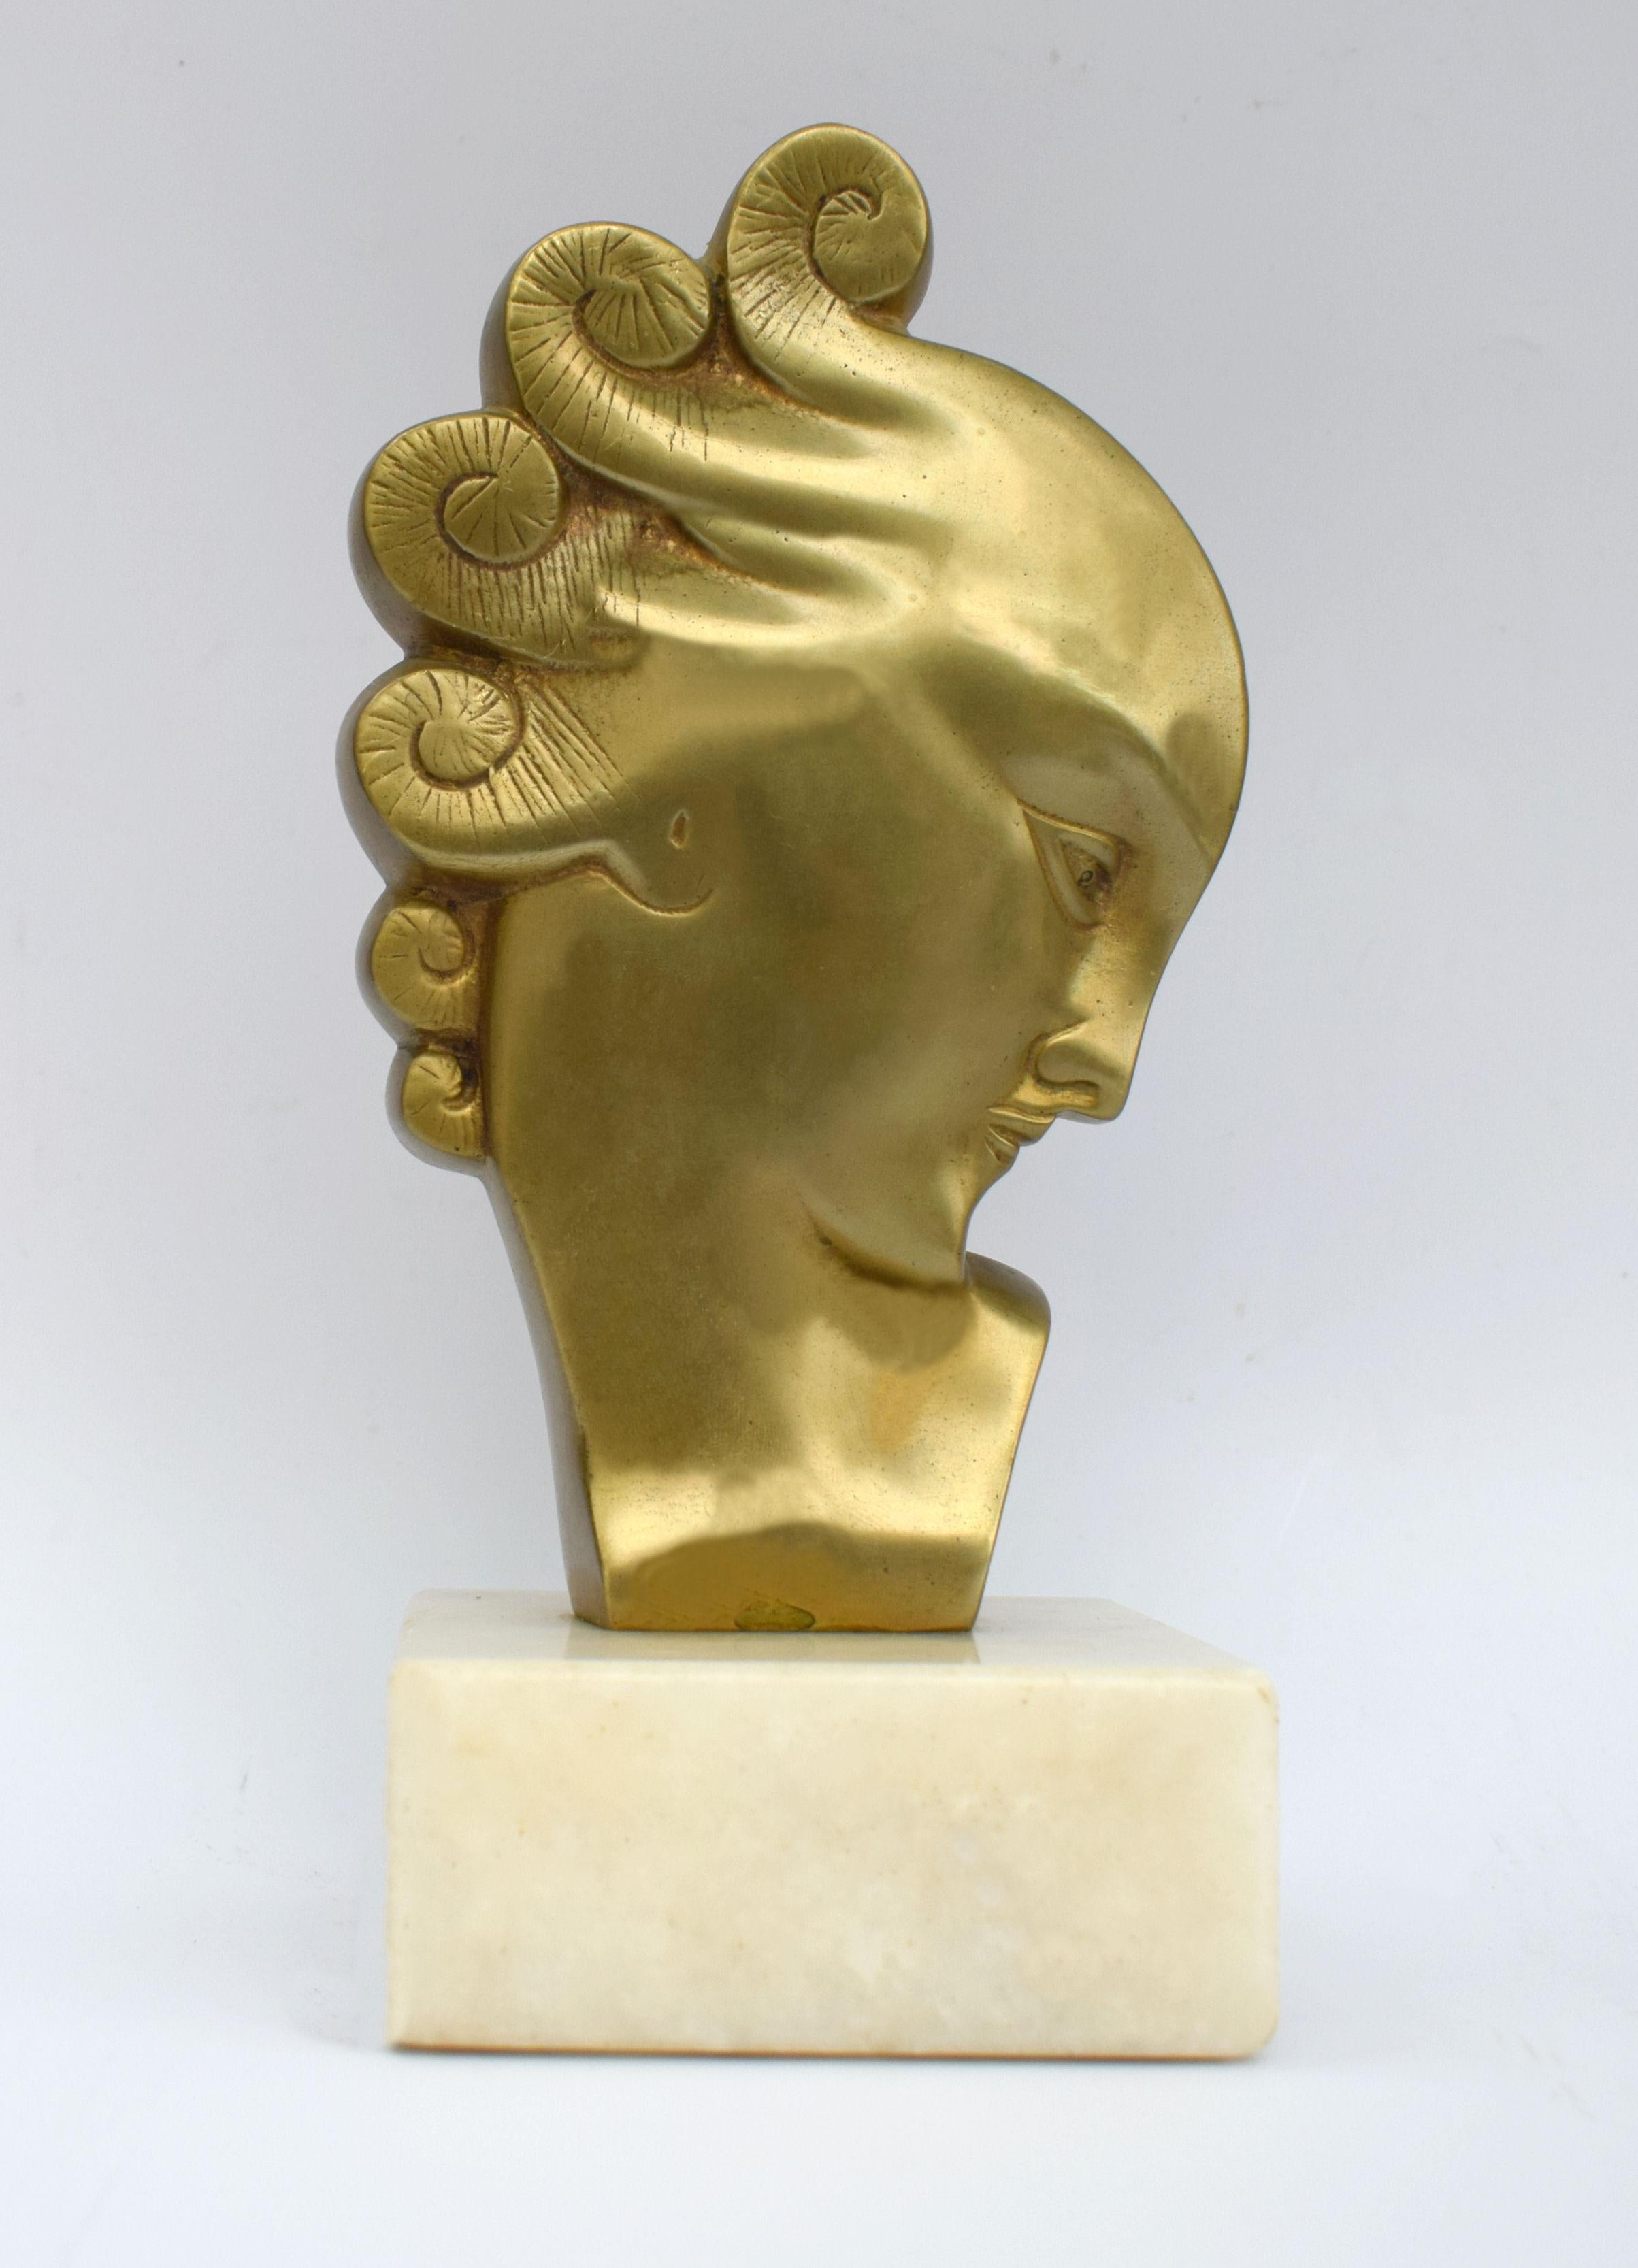 Magnificent Art Deco female profile head in gilded bronze sitting on a white marble base. Dating to the 1930s and originating from France. Although not signed it's very much in the style of Haguenauer's work. Lovely condition free from damage or any